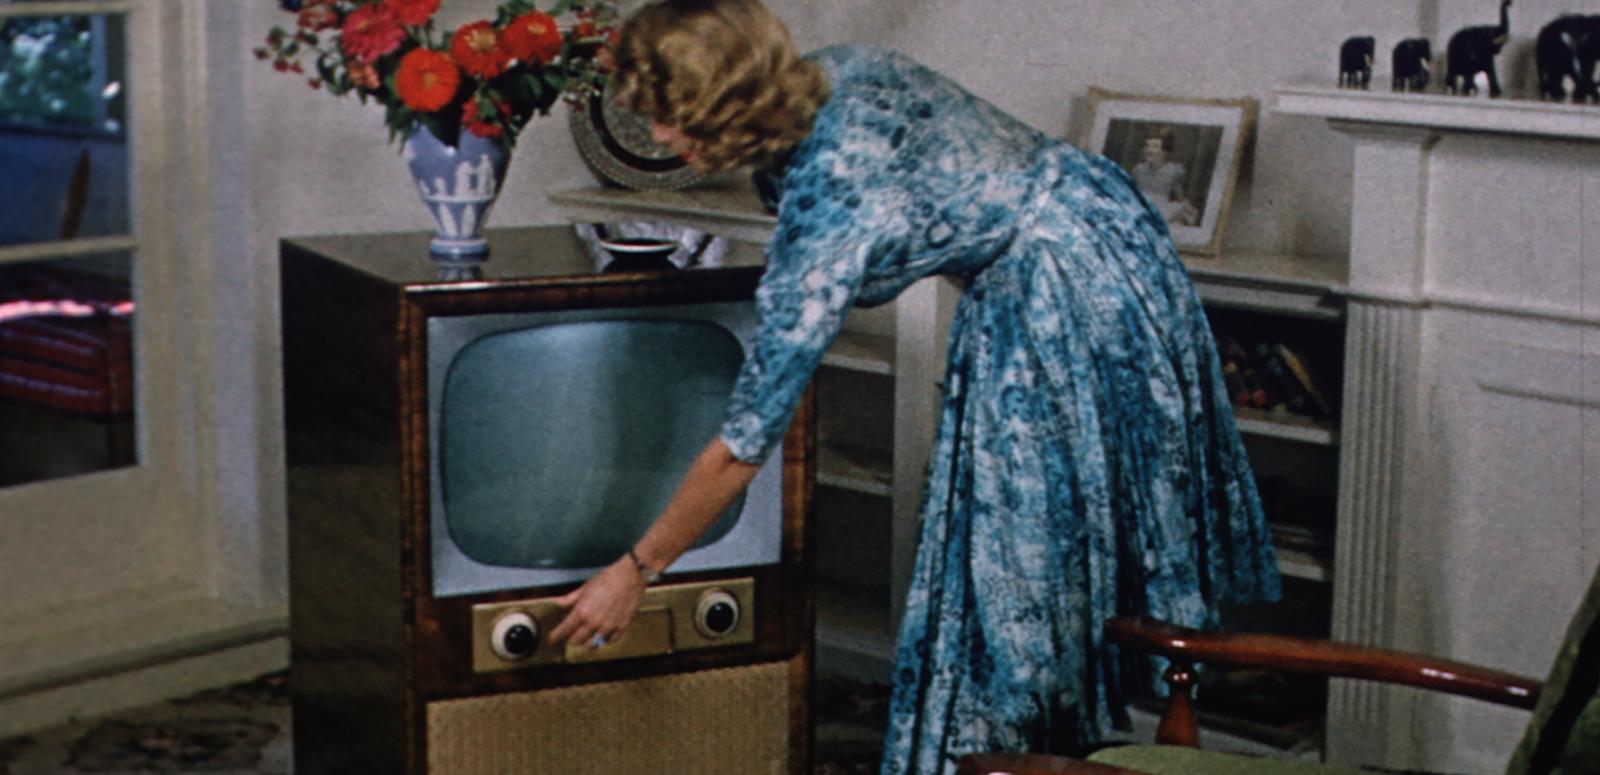 1950s image of a woman turning on a television set in her living room.